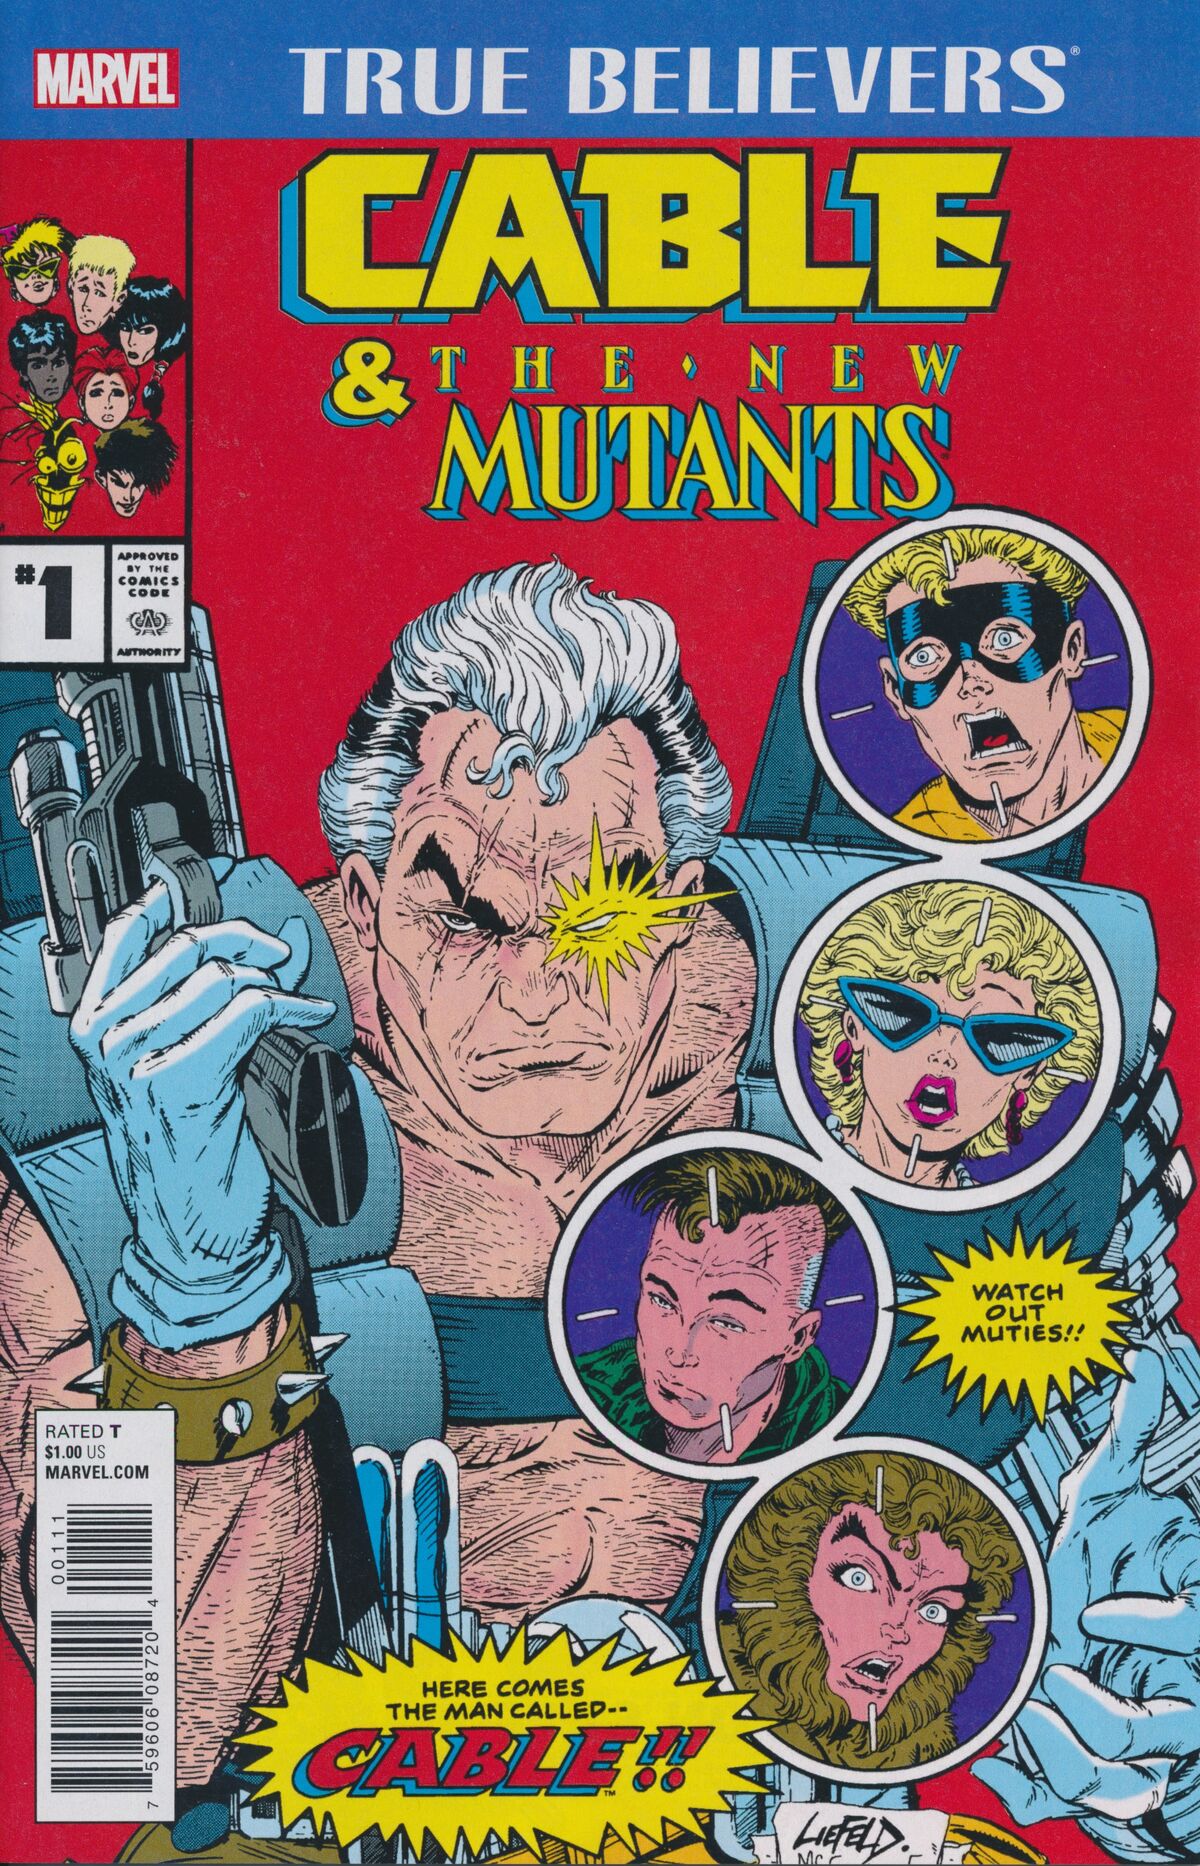 15 Surprising Facts about The New Mutants from the Marvel Universe